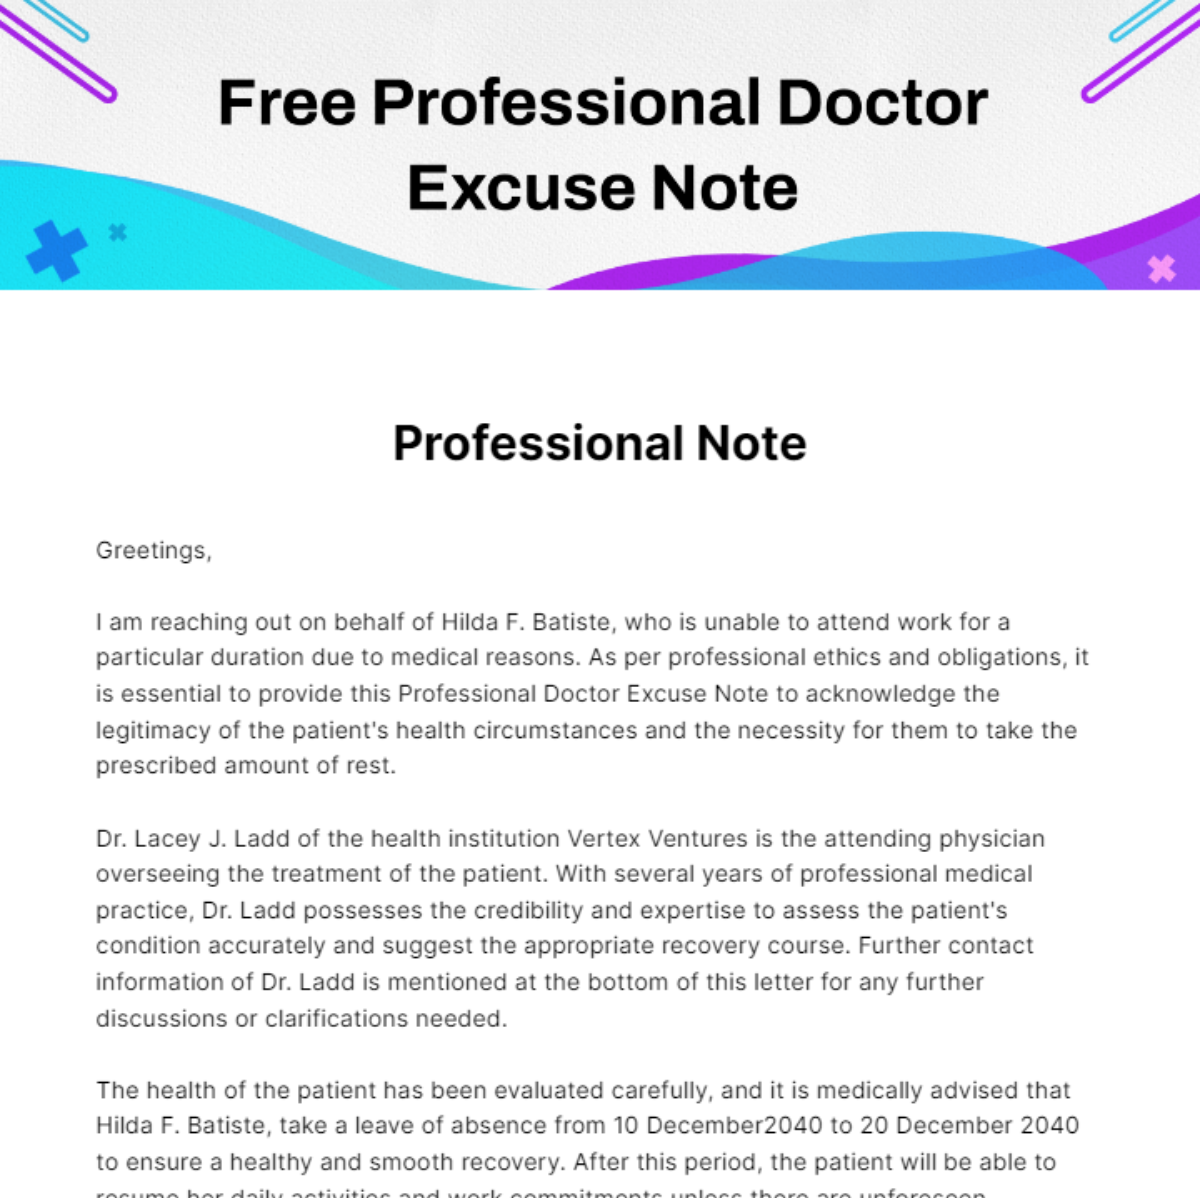 Free Professional Doctor Excuse Note Template